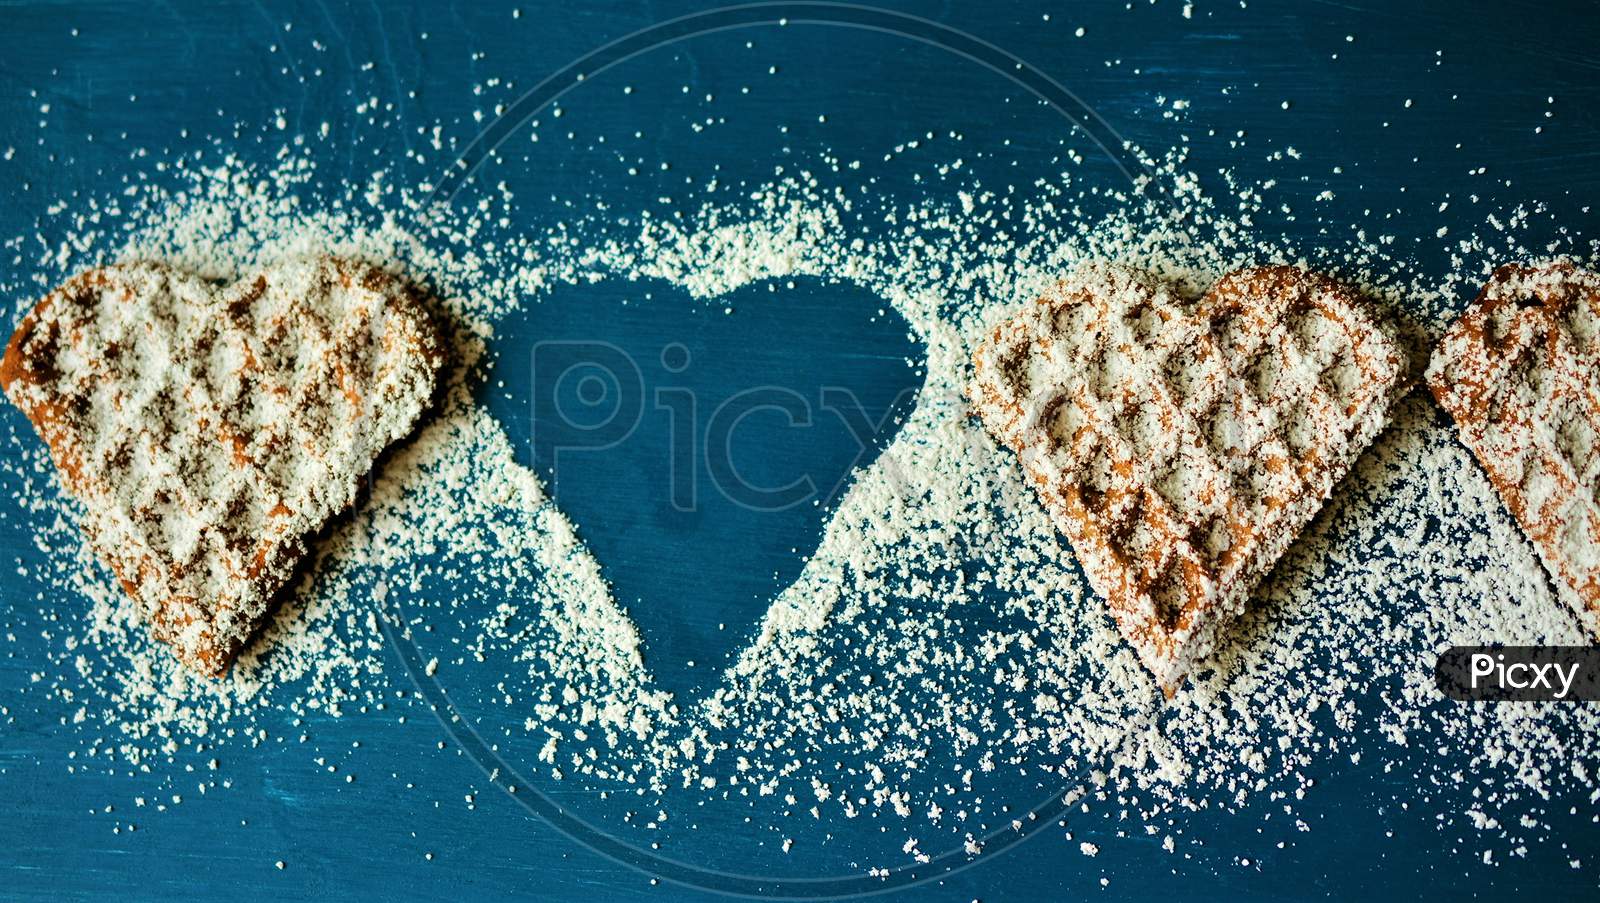 Pastry Waffles With Powdered For Sugar. Waffles Is Heart Shap Food 8K Image.